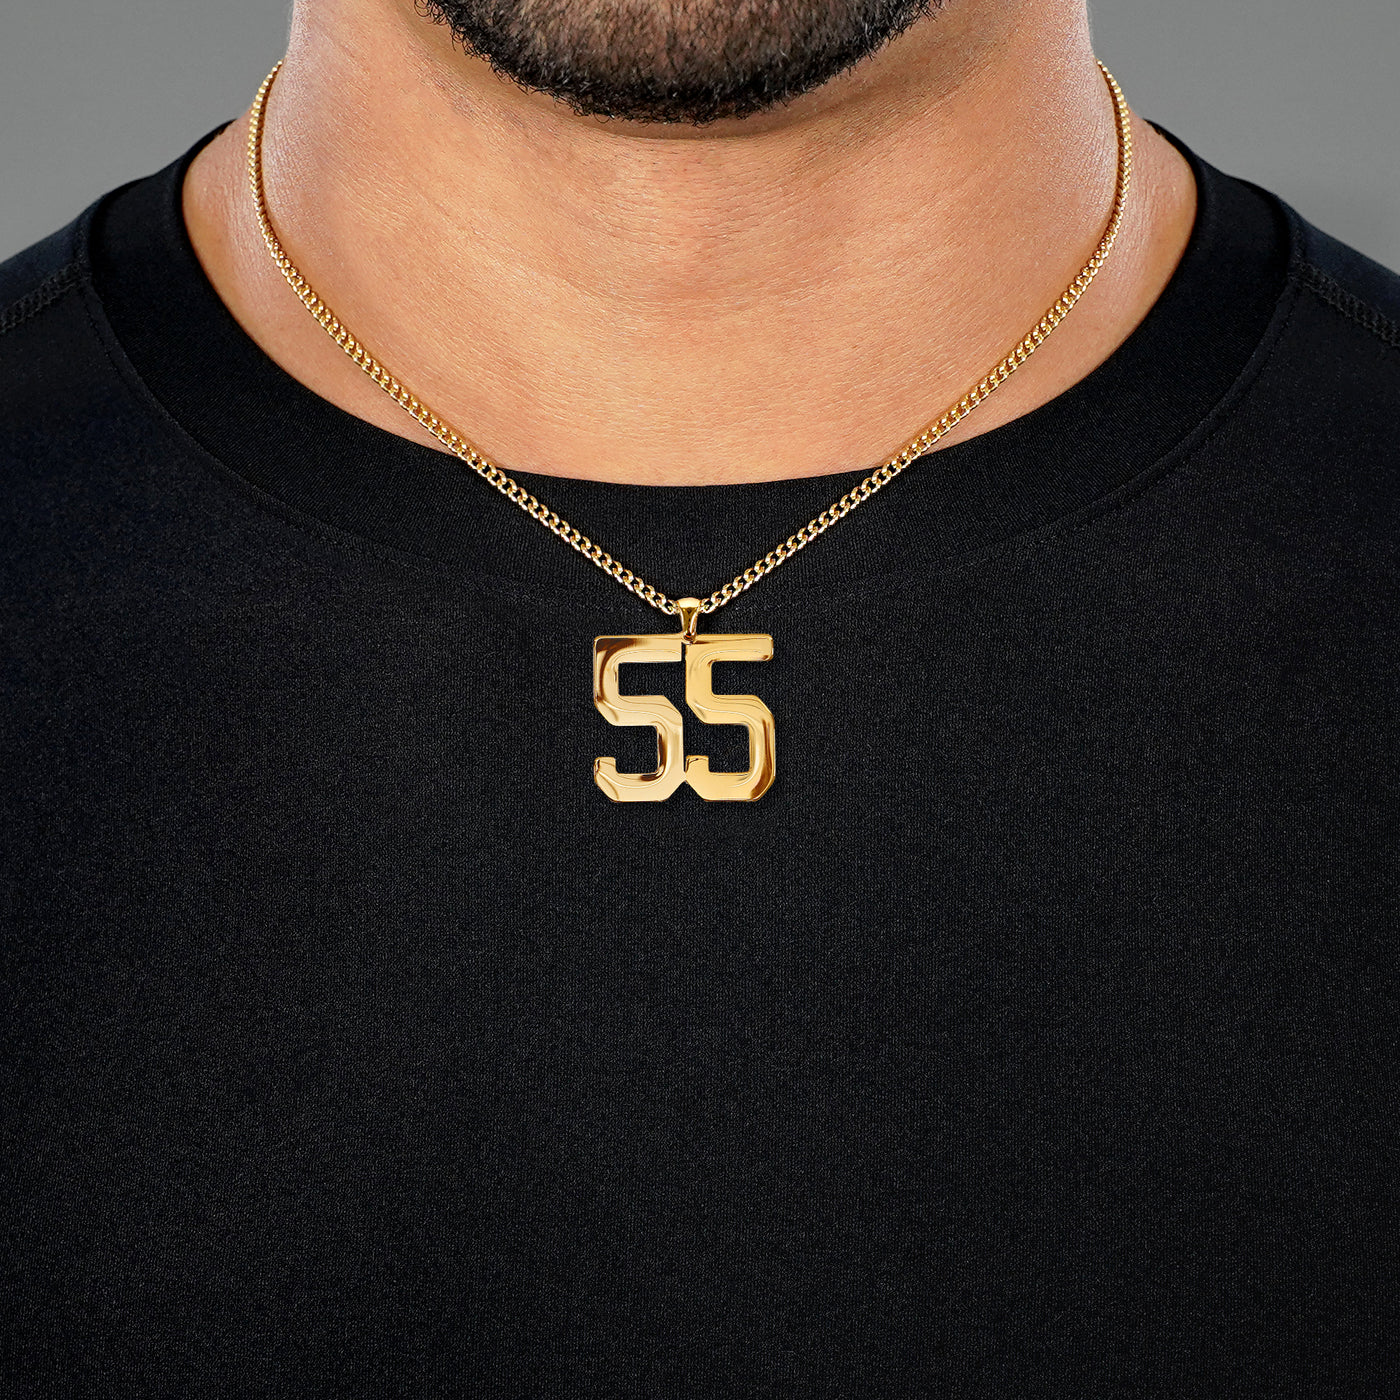 55 Number Pendant with Chain Necklace - Gold Plated Stainless Steel